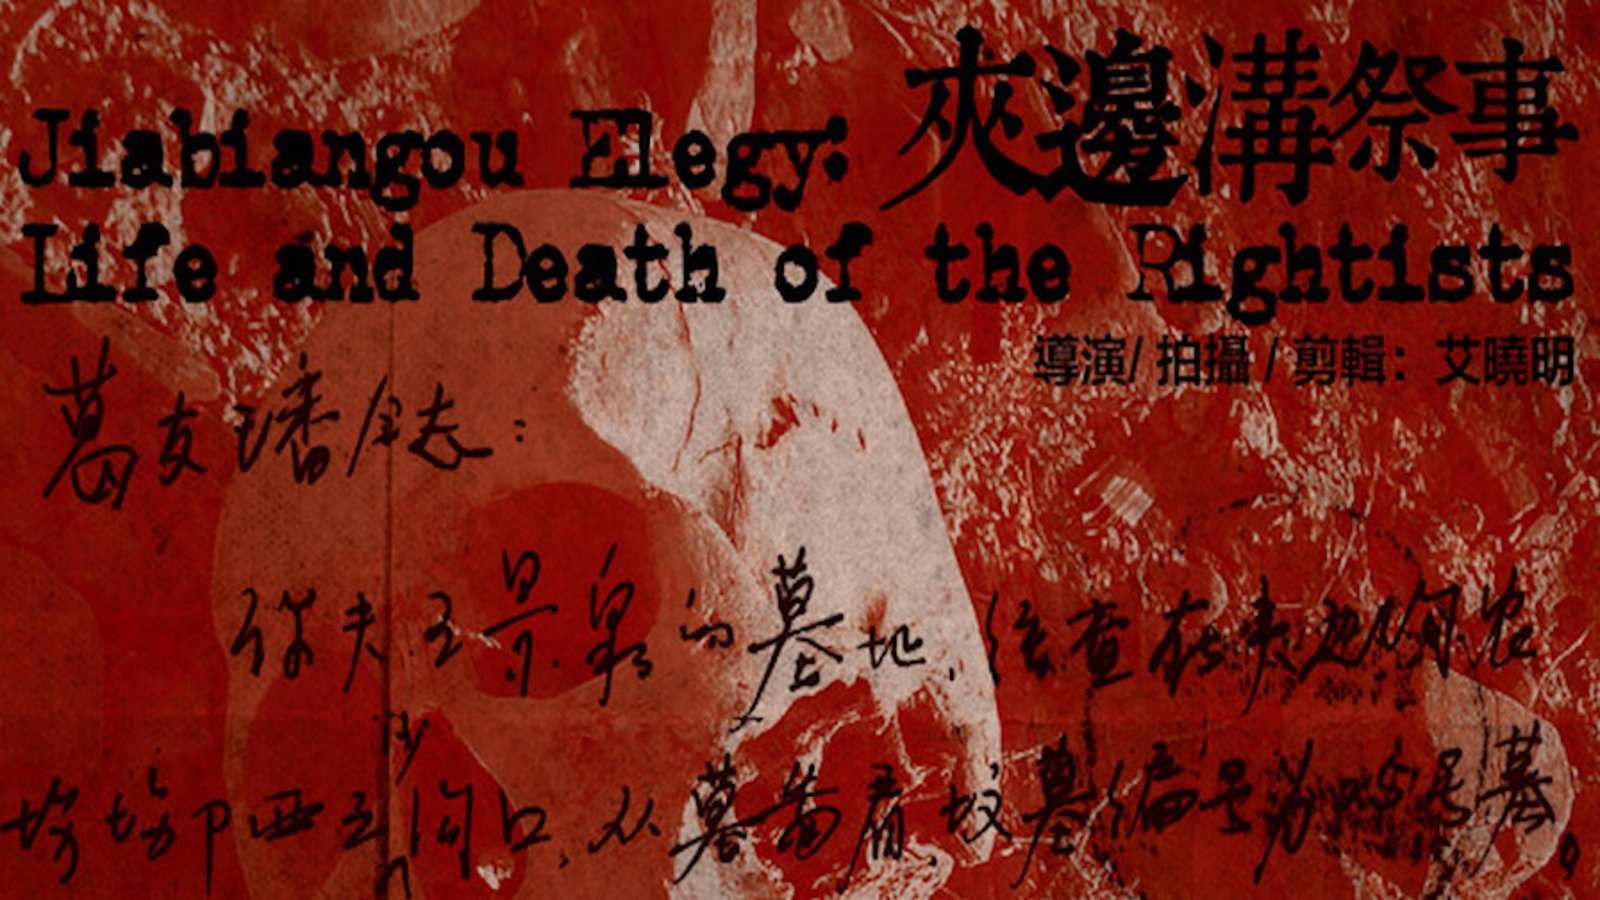 Jiabiangou Elegy: Life and Death of the Rightists - The Persecution of Inmates at the Jiabiangou Labor Camp